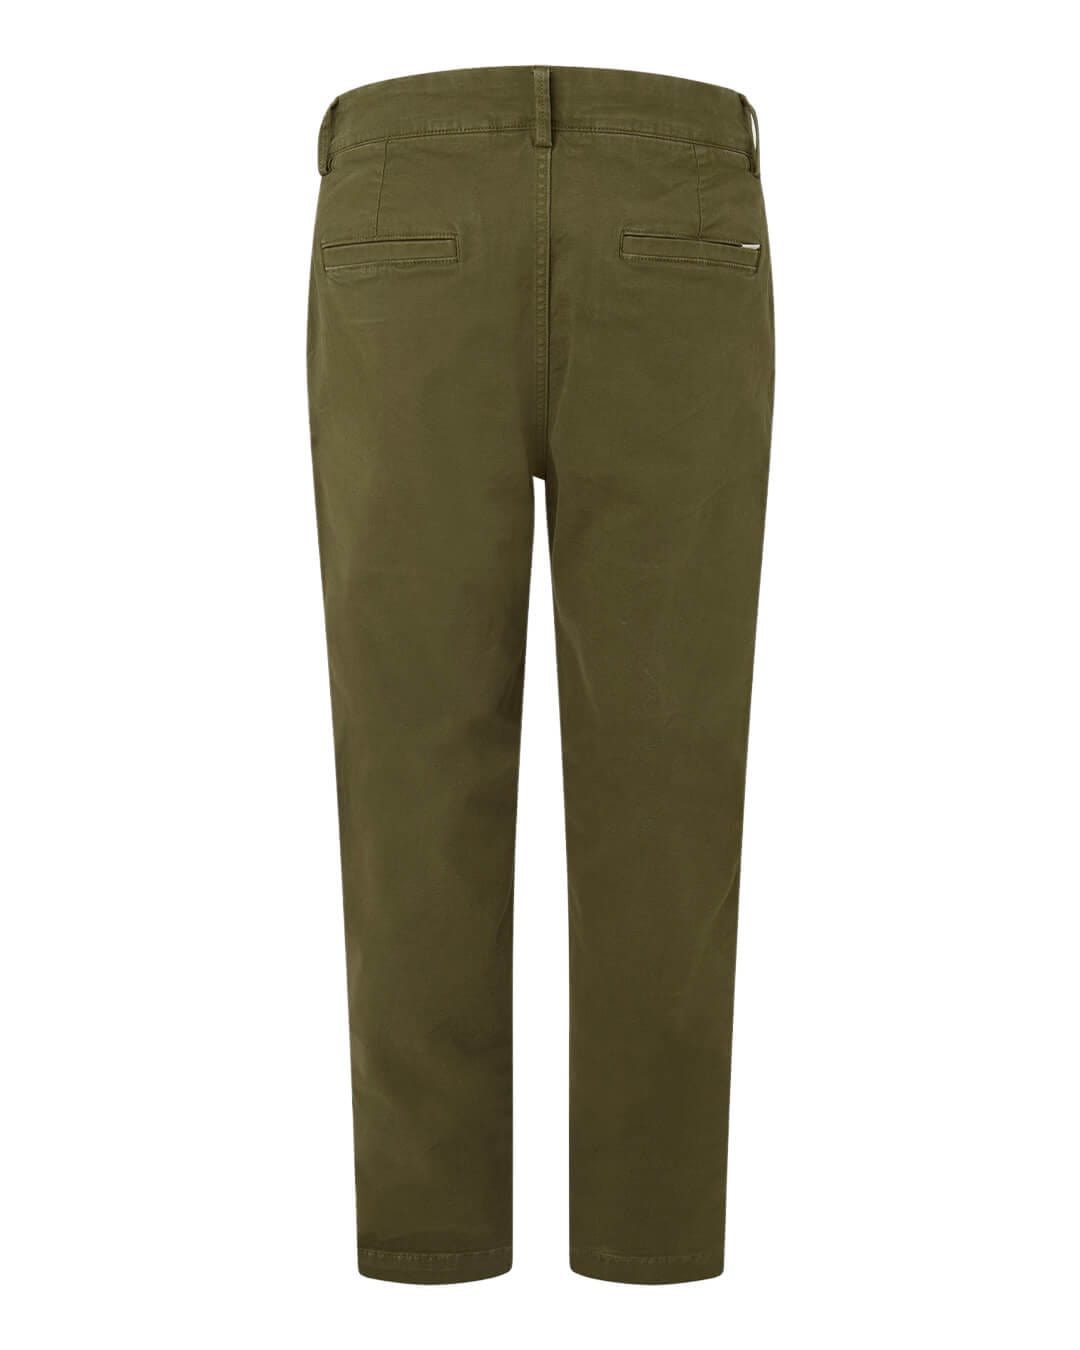 Pepe Jeans Trousers Pepe Jeans Green Regular Fit Chino Trousers